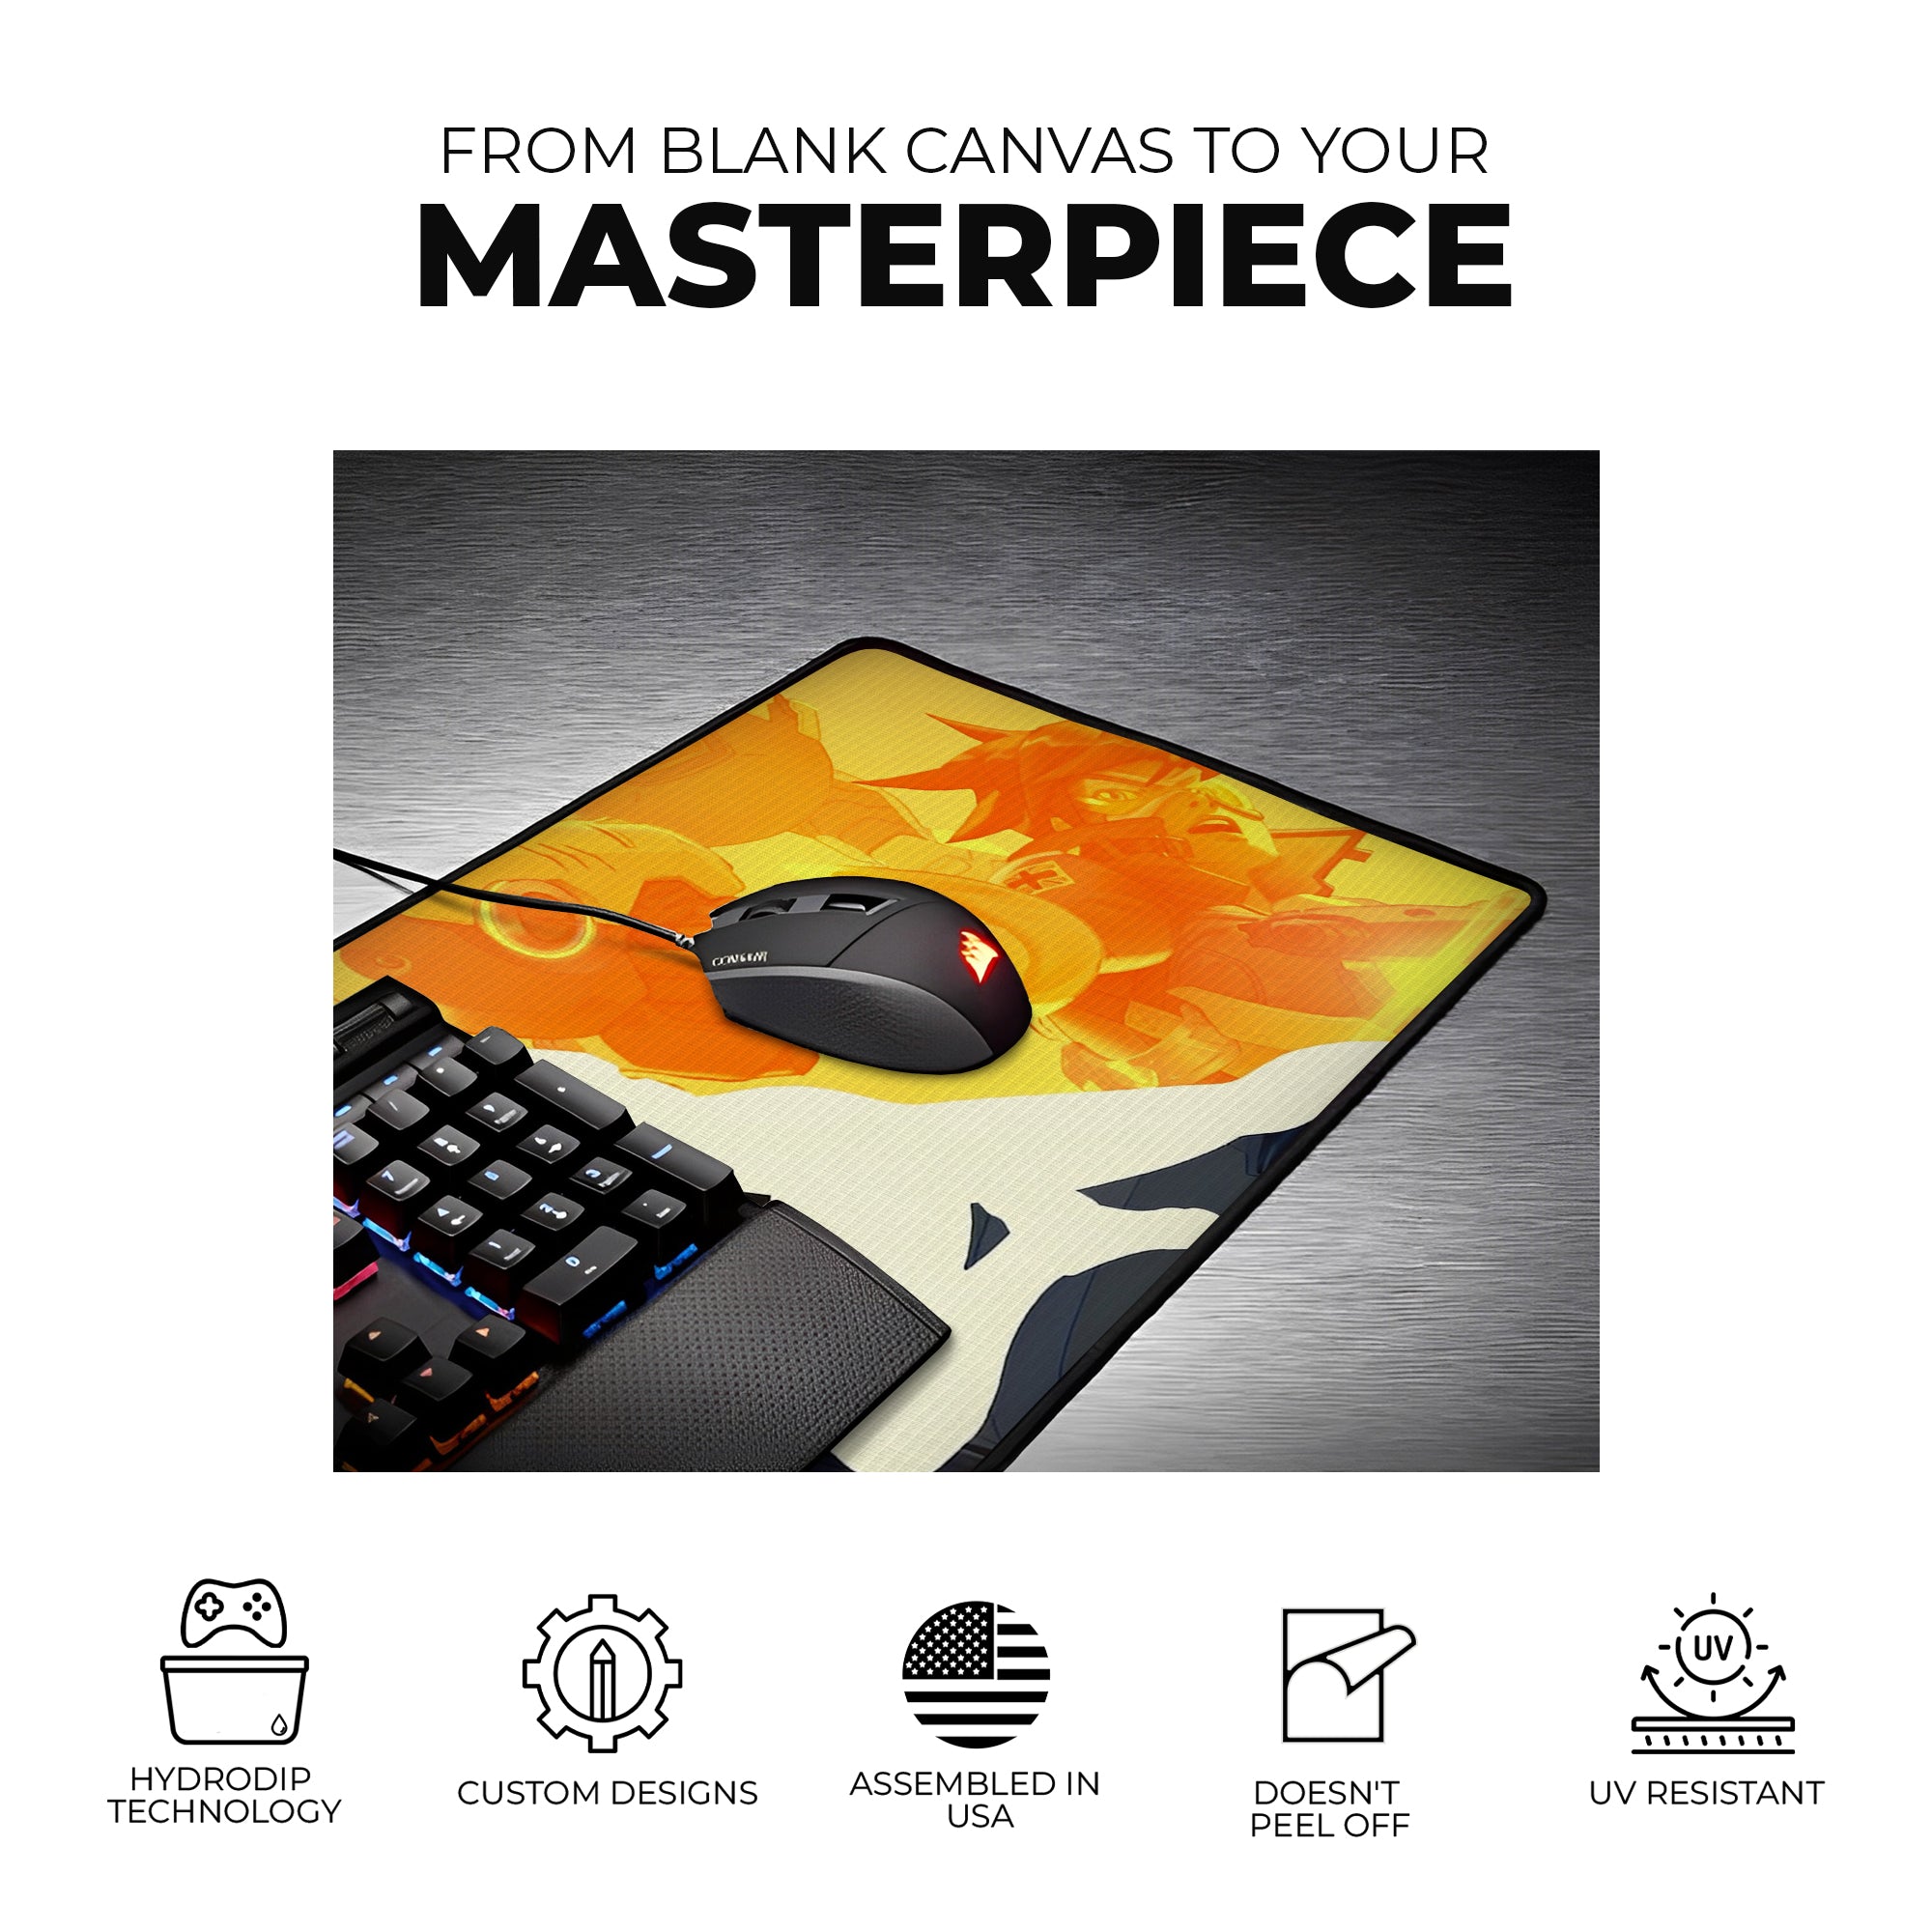 Overwatch inspired Custom Gaming Mouse Pad